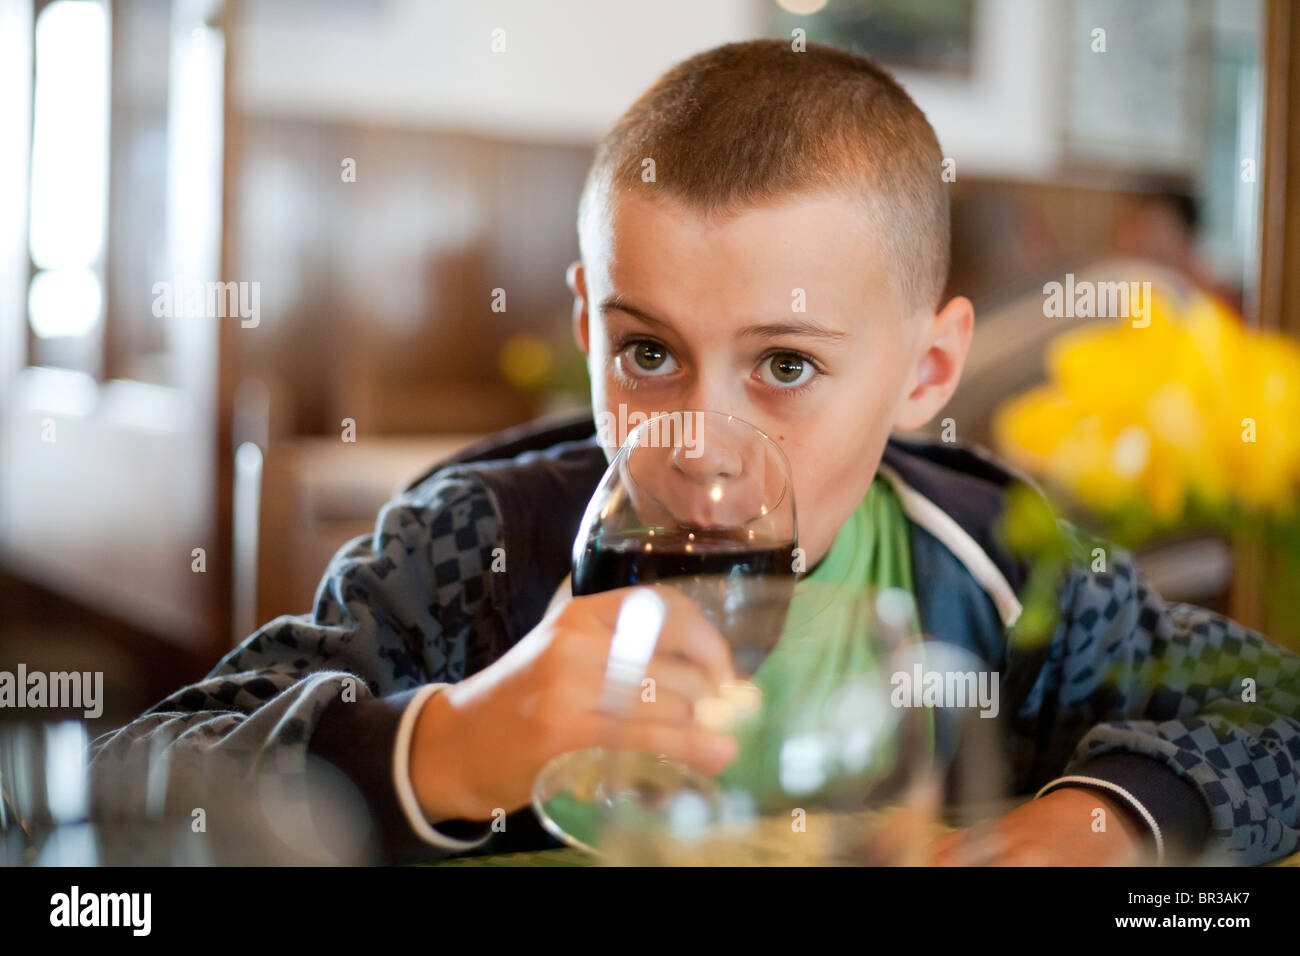 Cute kid drinking soda from a glass, in a restaurant Stock Photo